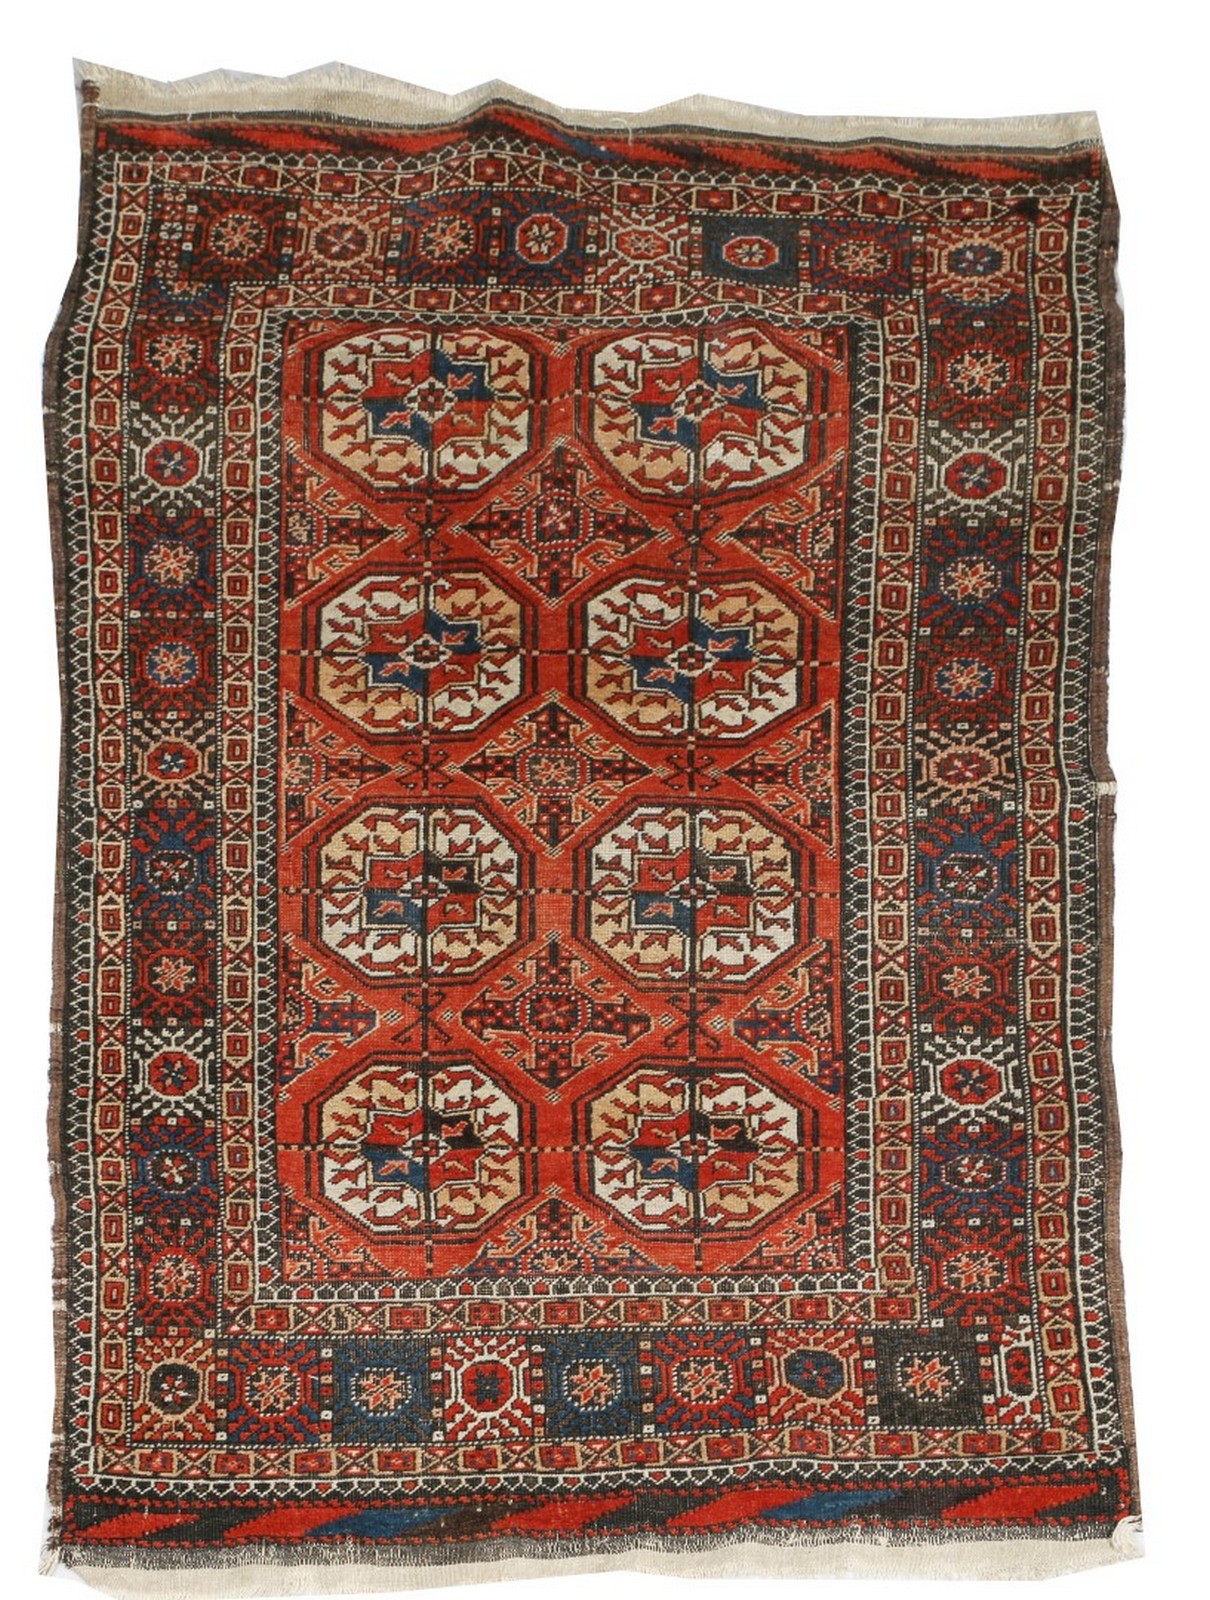 AN ANTIQUE BELOUCH RUG with two rows of four guls on a rust brown field with diagonal end borders,